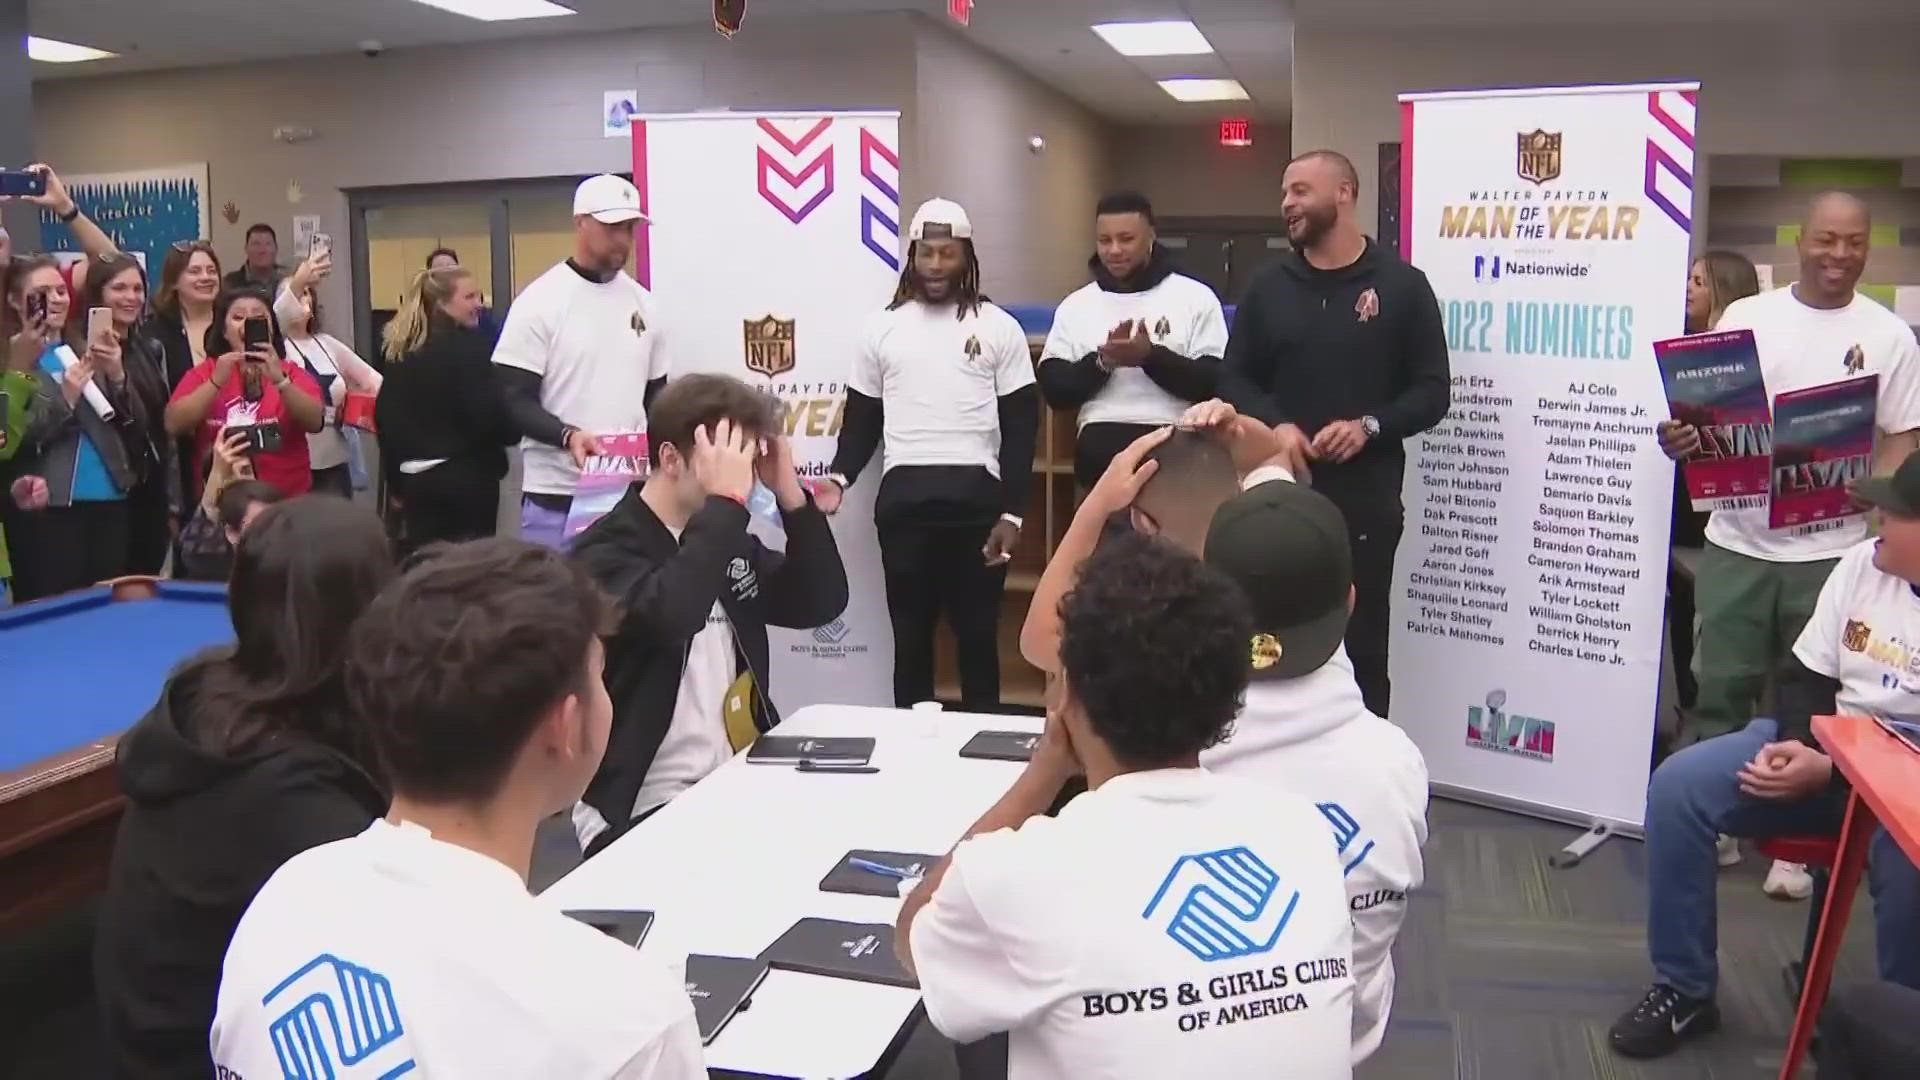 One day after winning the Walter Payton Man of the Year Award, Dallas Cowboys quarterback Dak Prescott was giving back to the local community.